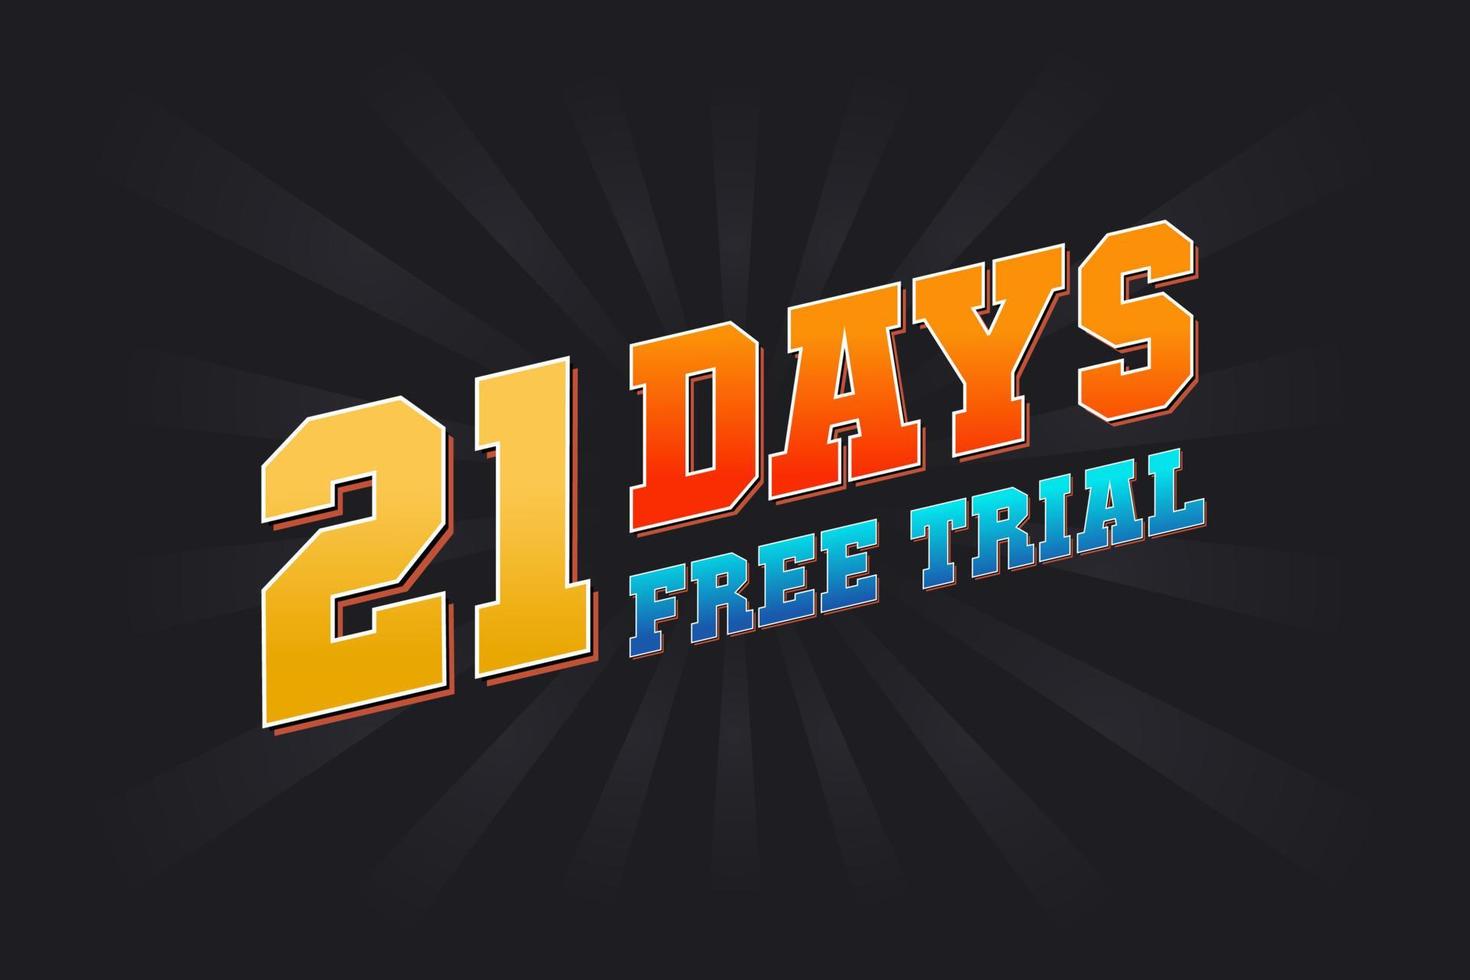 21 Days free Trial promotional bold text stock vector